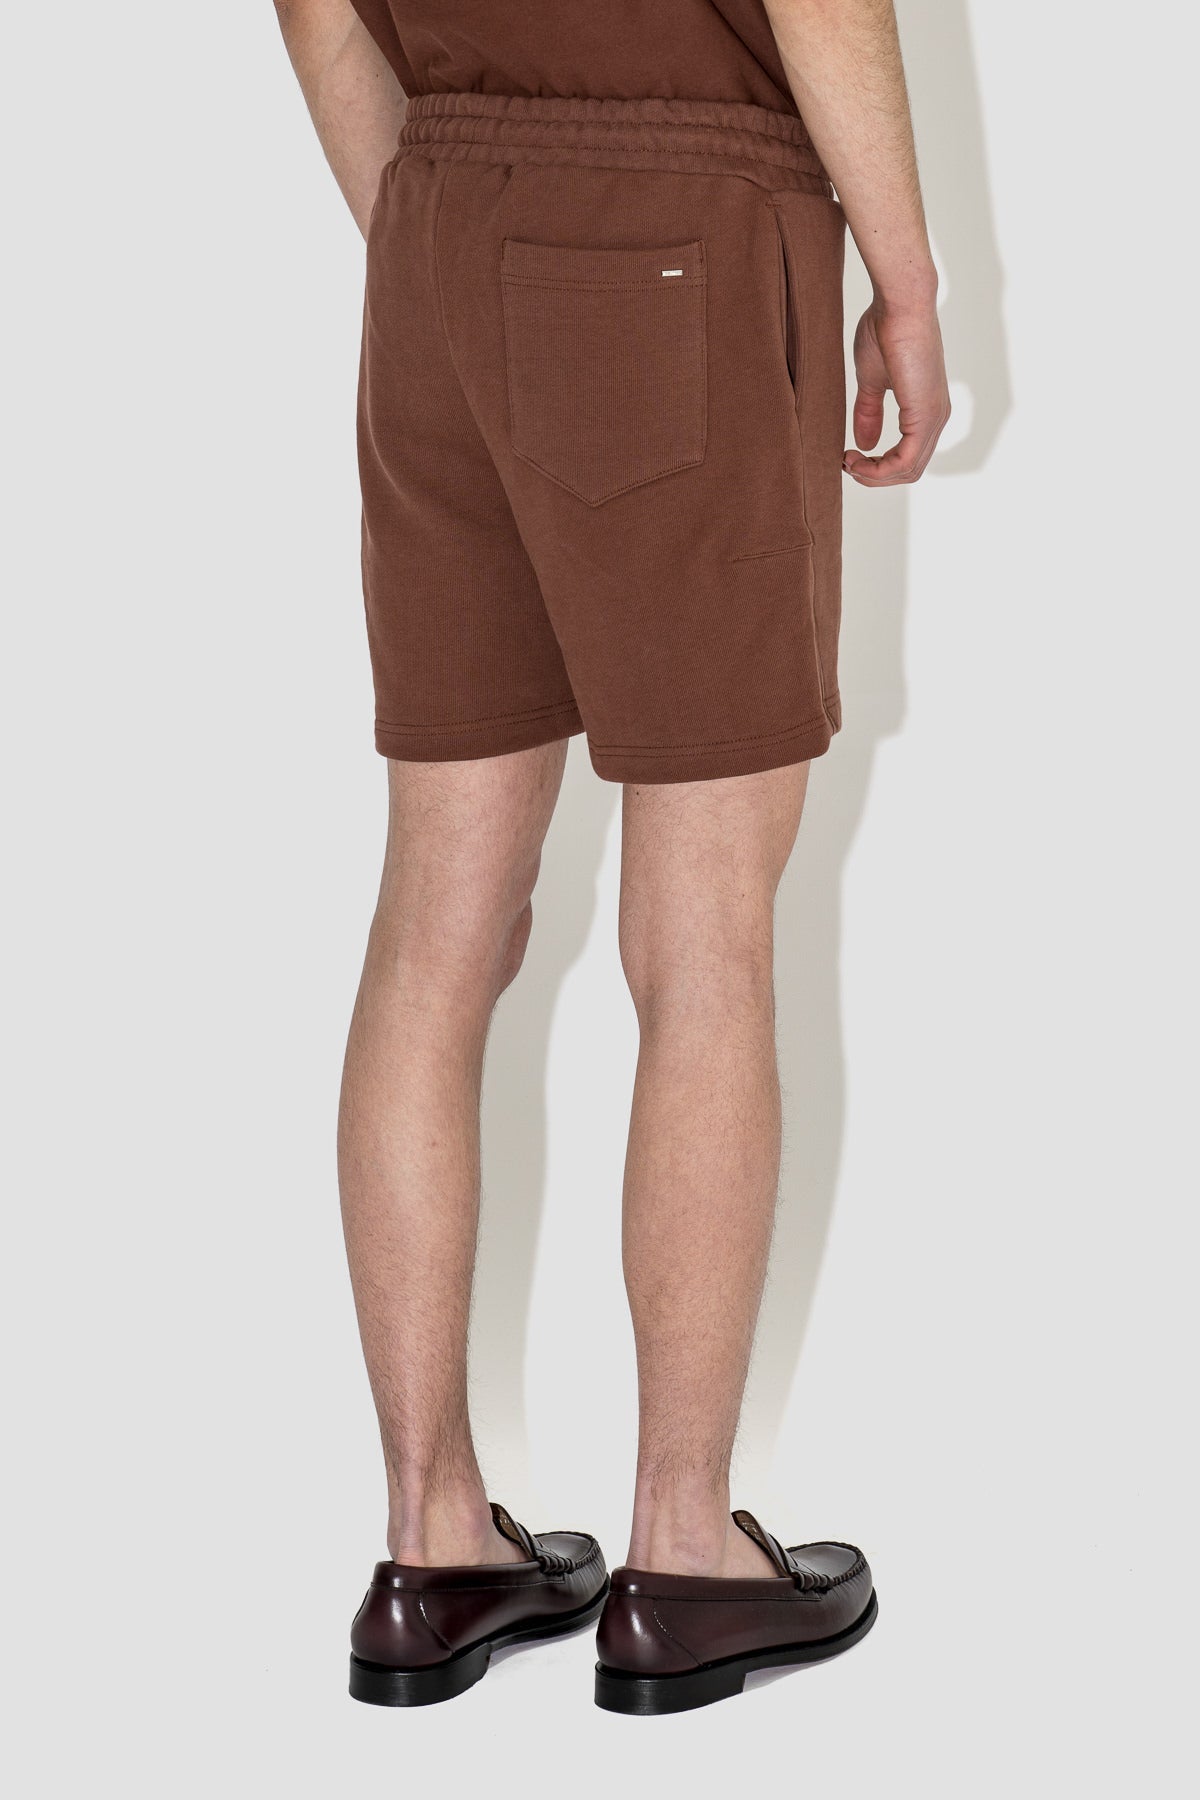 Embroidered Signature Shorts in Dark Brown